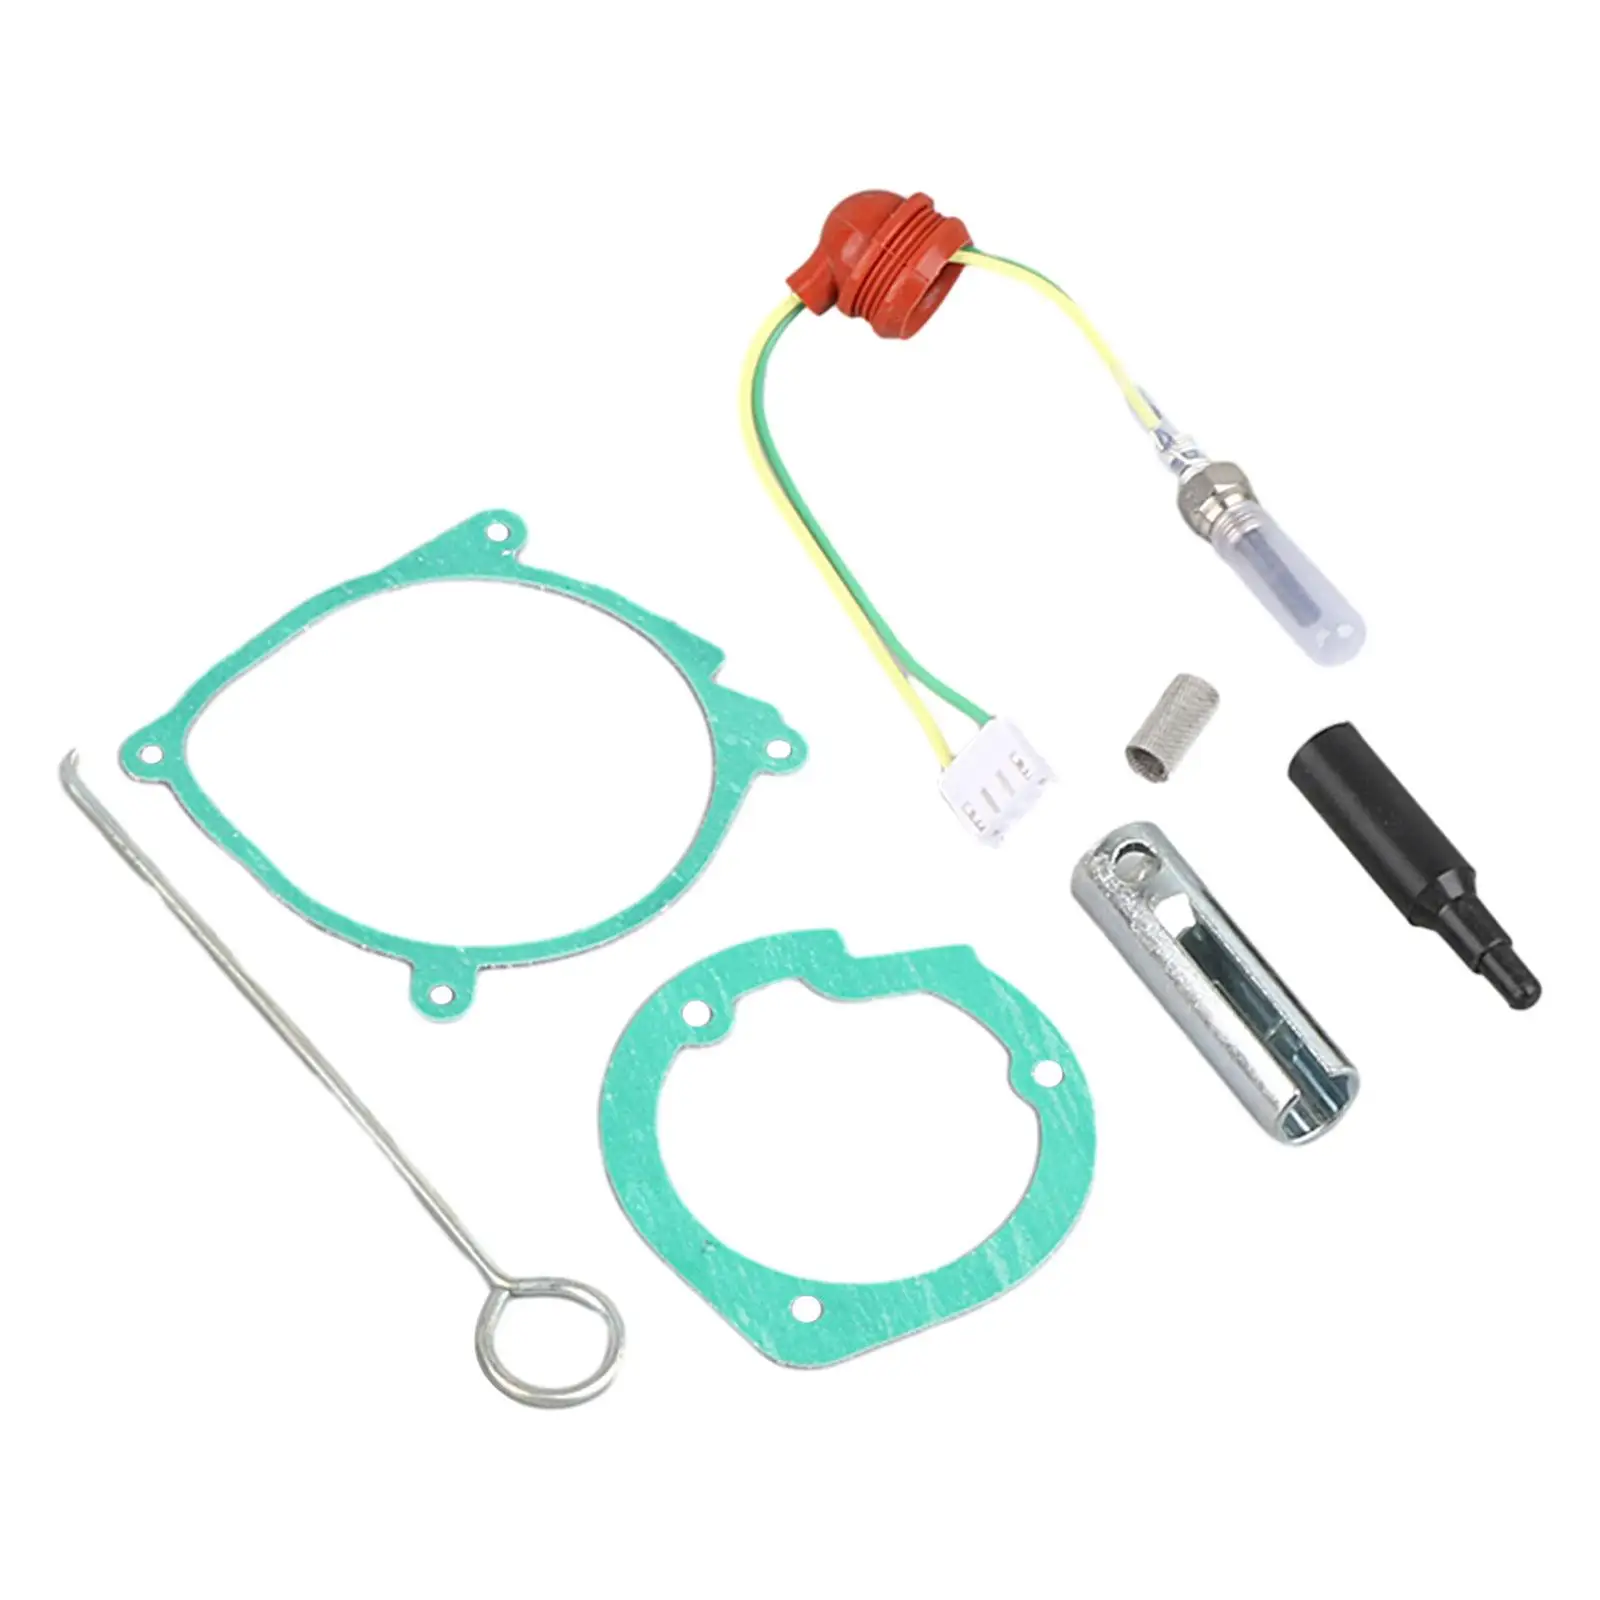 Glow Plug Repair Kit Direct Replaces Heater Accessories Net Car Heater Repair Parts for 12V 2kW Parking Heater Boat Vehicle